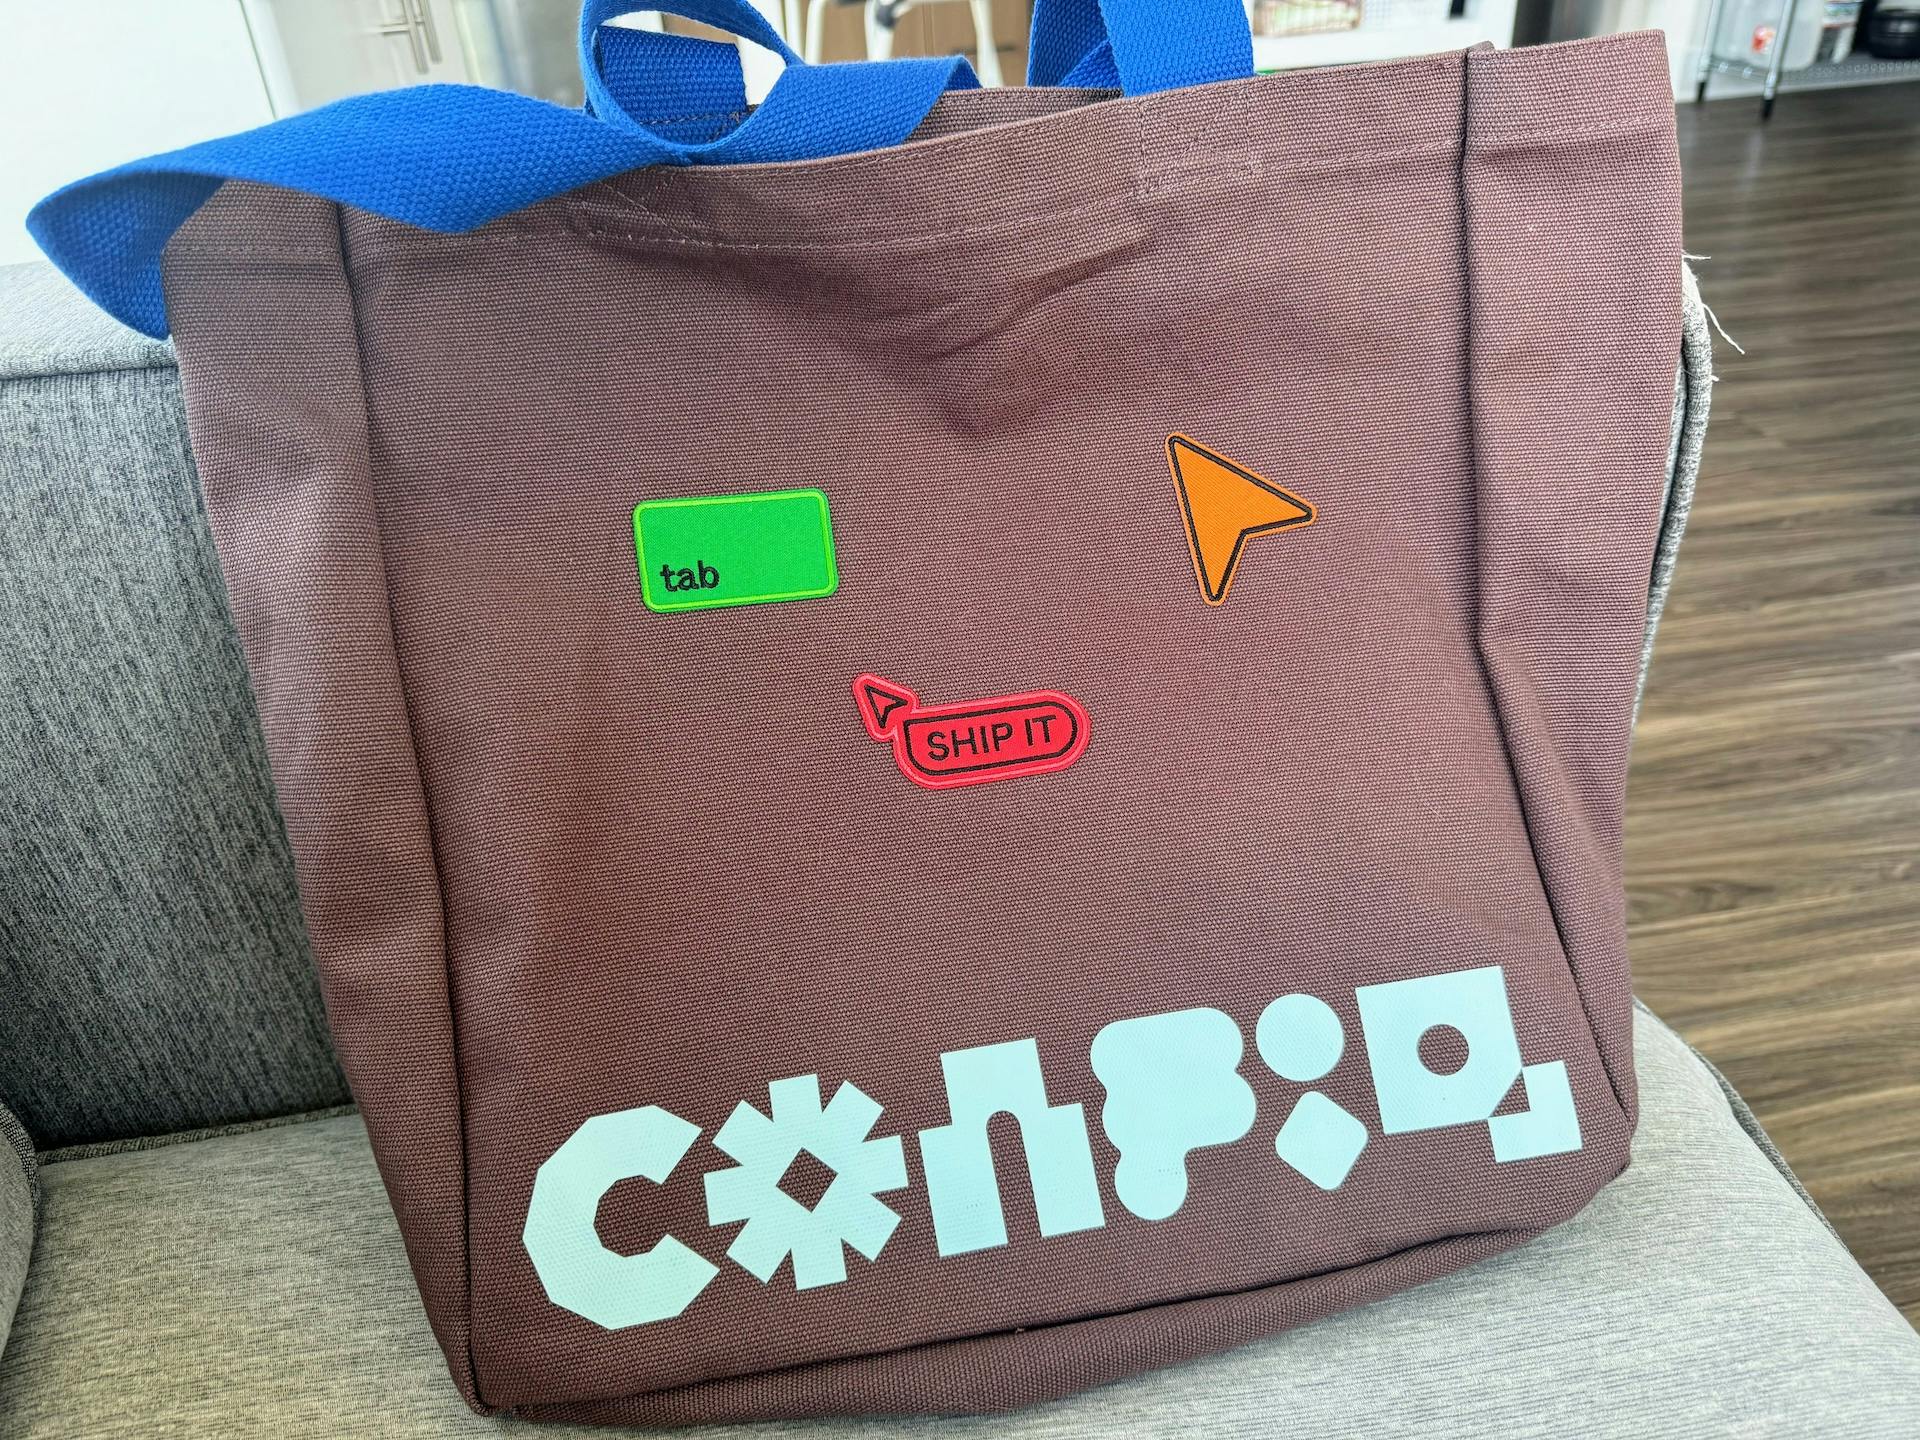 Figma tote bag with patches on it